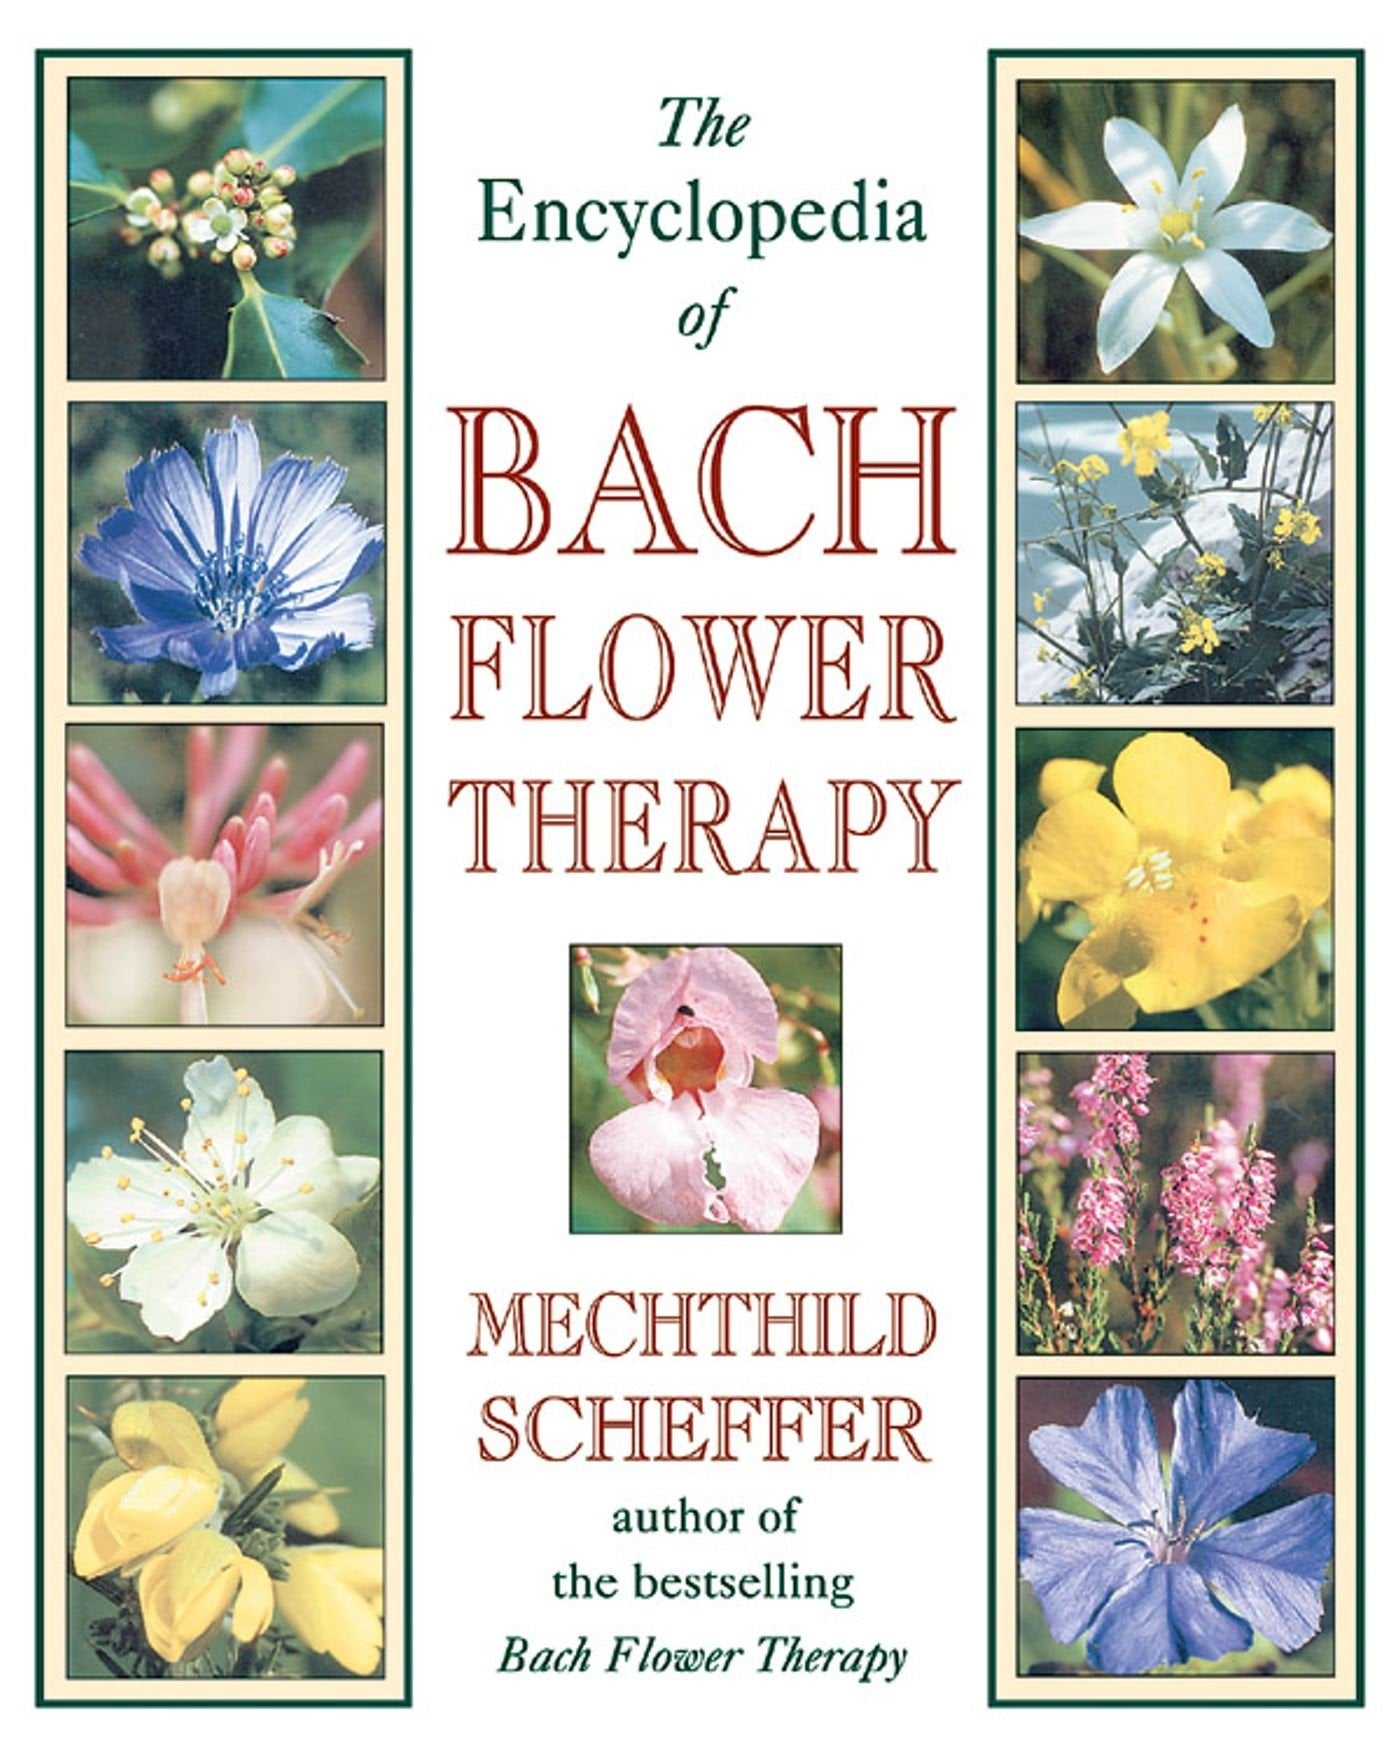 Encyclopedia of Bach Flower Therapy - Mechthild Scheffer